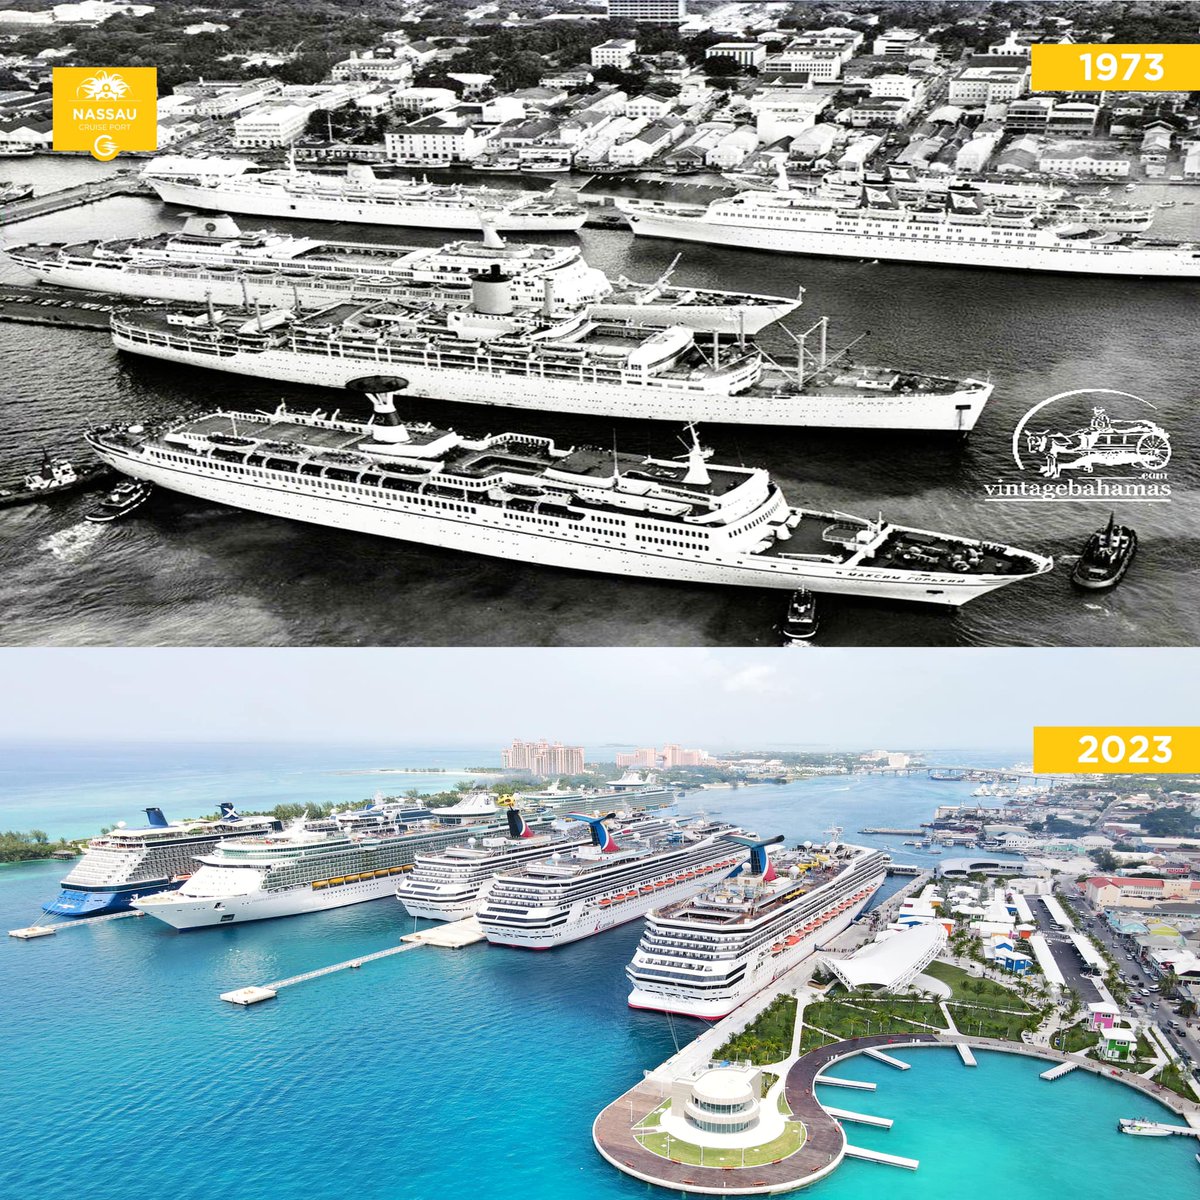 What a beautiful picture. 30 years later and continuing to grow our cruise port to meet demand. #BahamasStrong #Tourism facebook.com/nassaucruisepo…